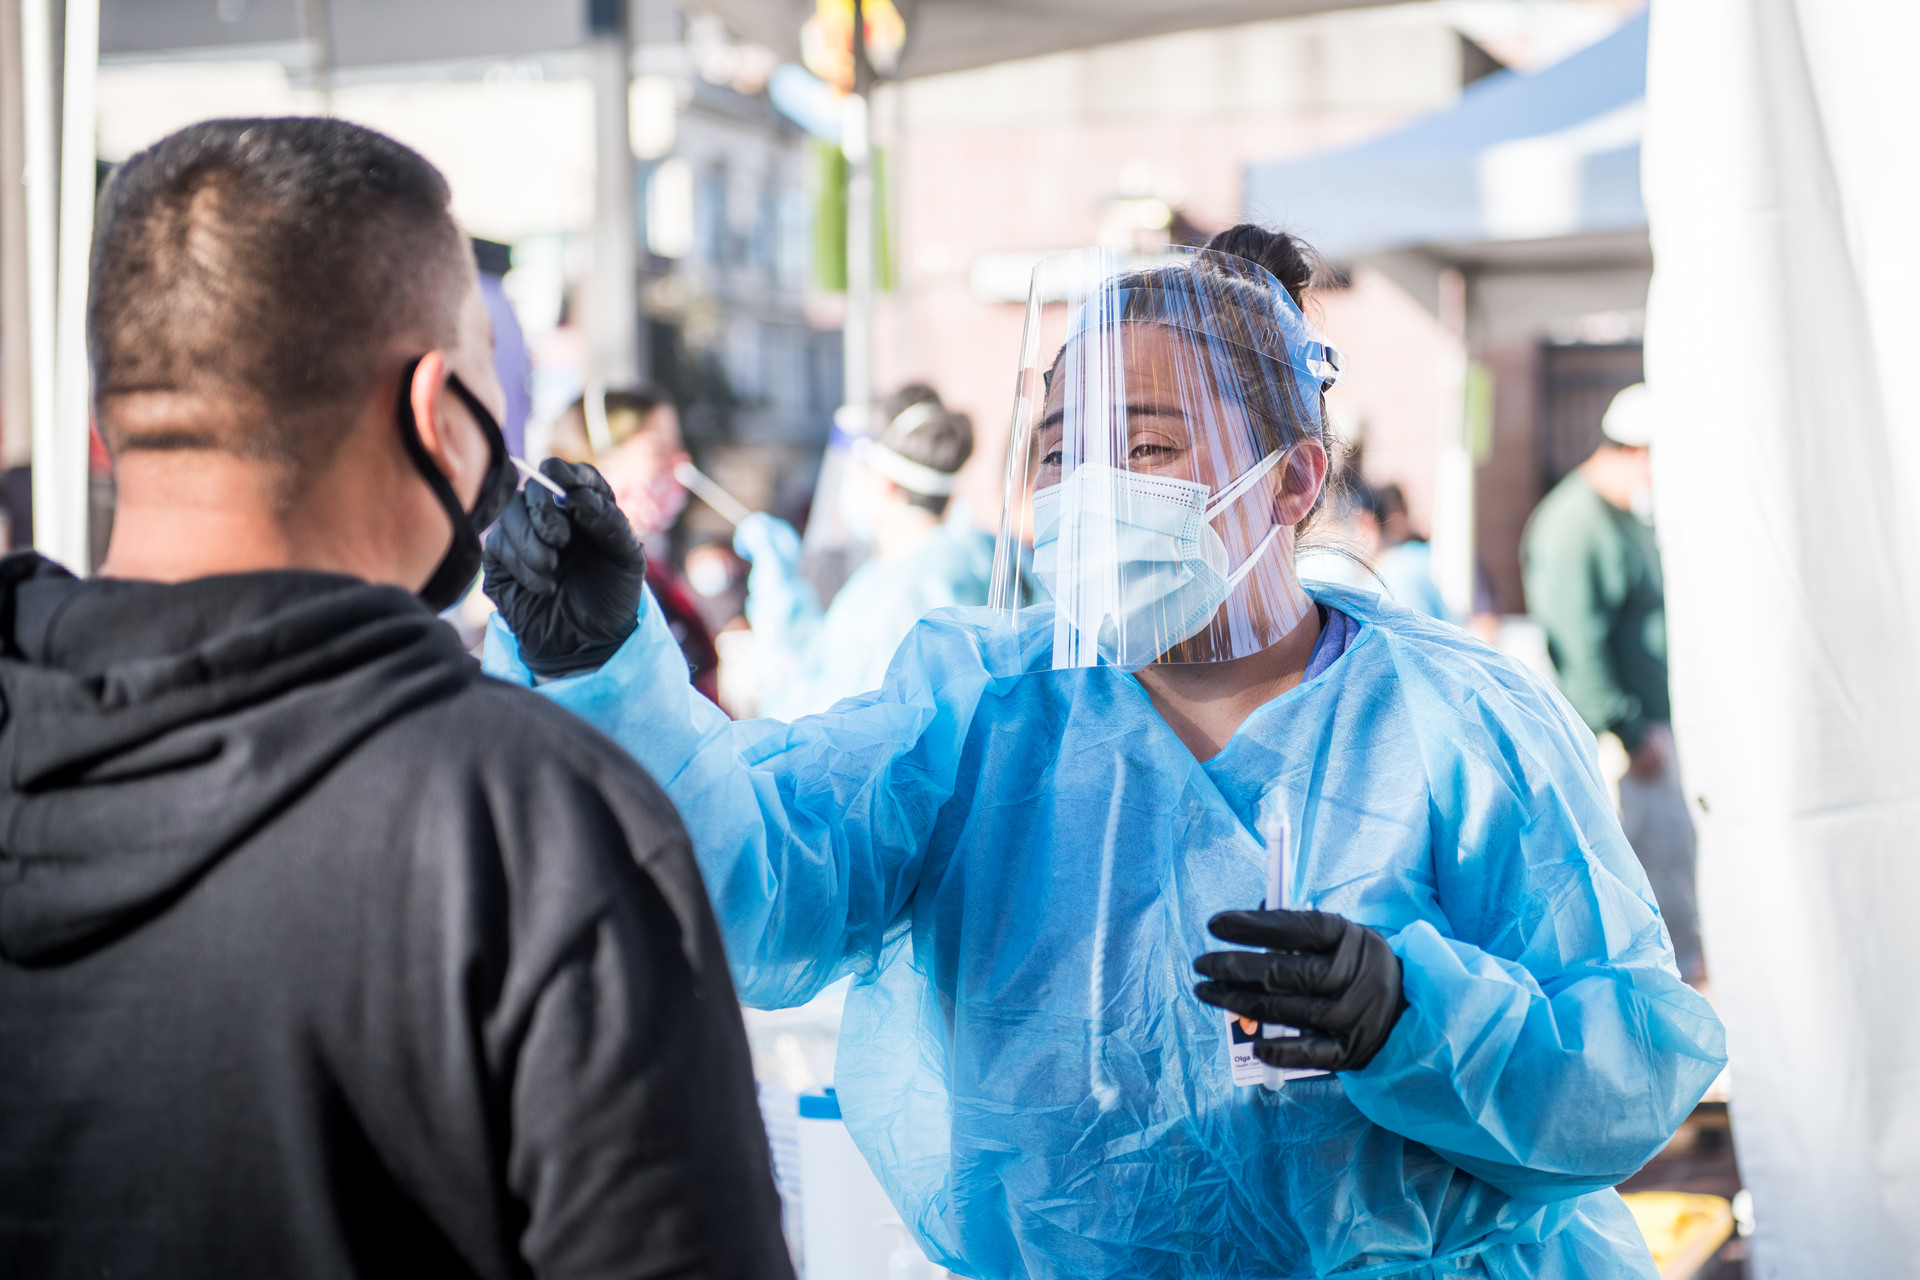 A nurse in full PPE prepares to swab man wearing a mask facing away from camera, outside in sunlight